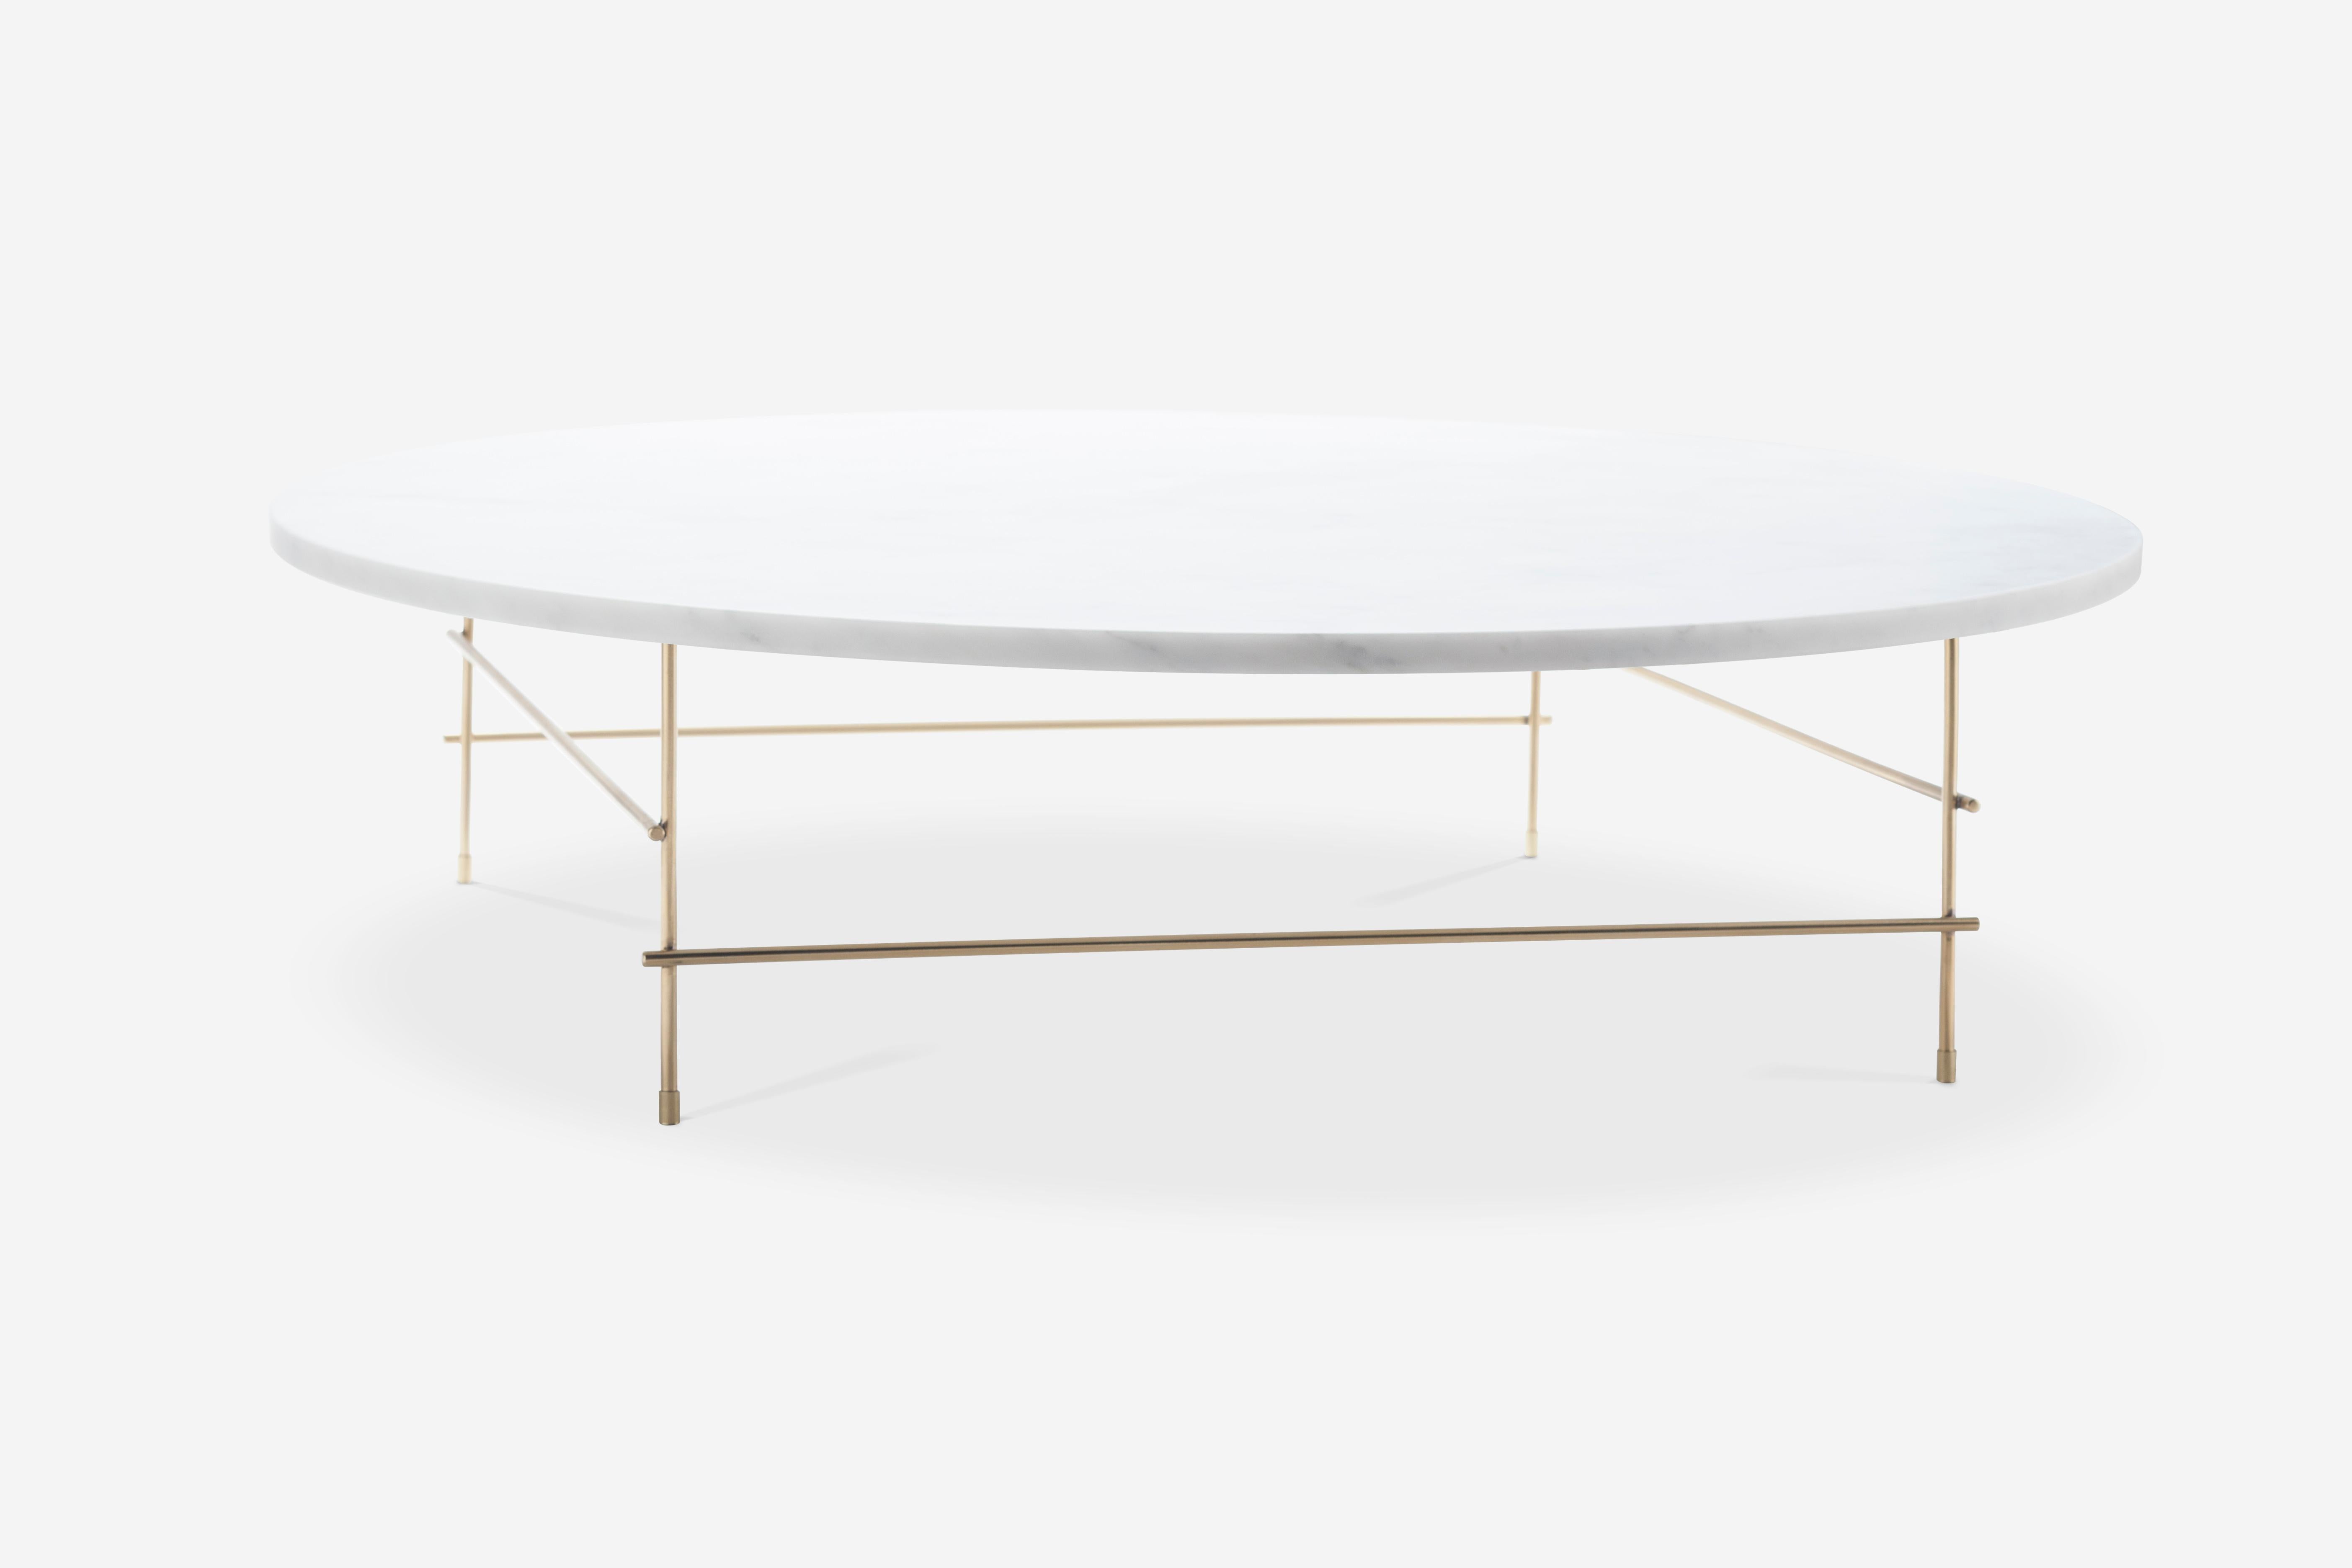 Marble coffee table by Joseph Vila Capdevila
Material: Carrara marble, brass
Dimensions: ø 100 x 25.5 cm
Weight: 46.5 kg


Aparentment is a space for creation and innovation, experimenting with materials with the goal to develop robust,